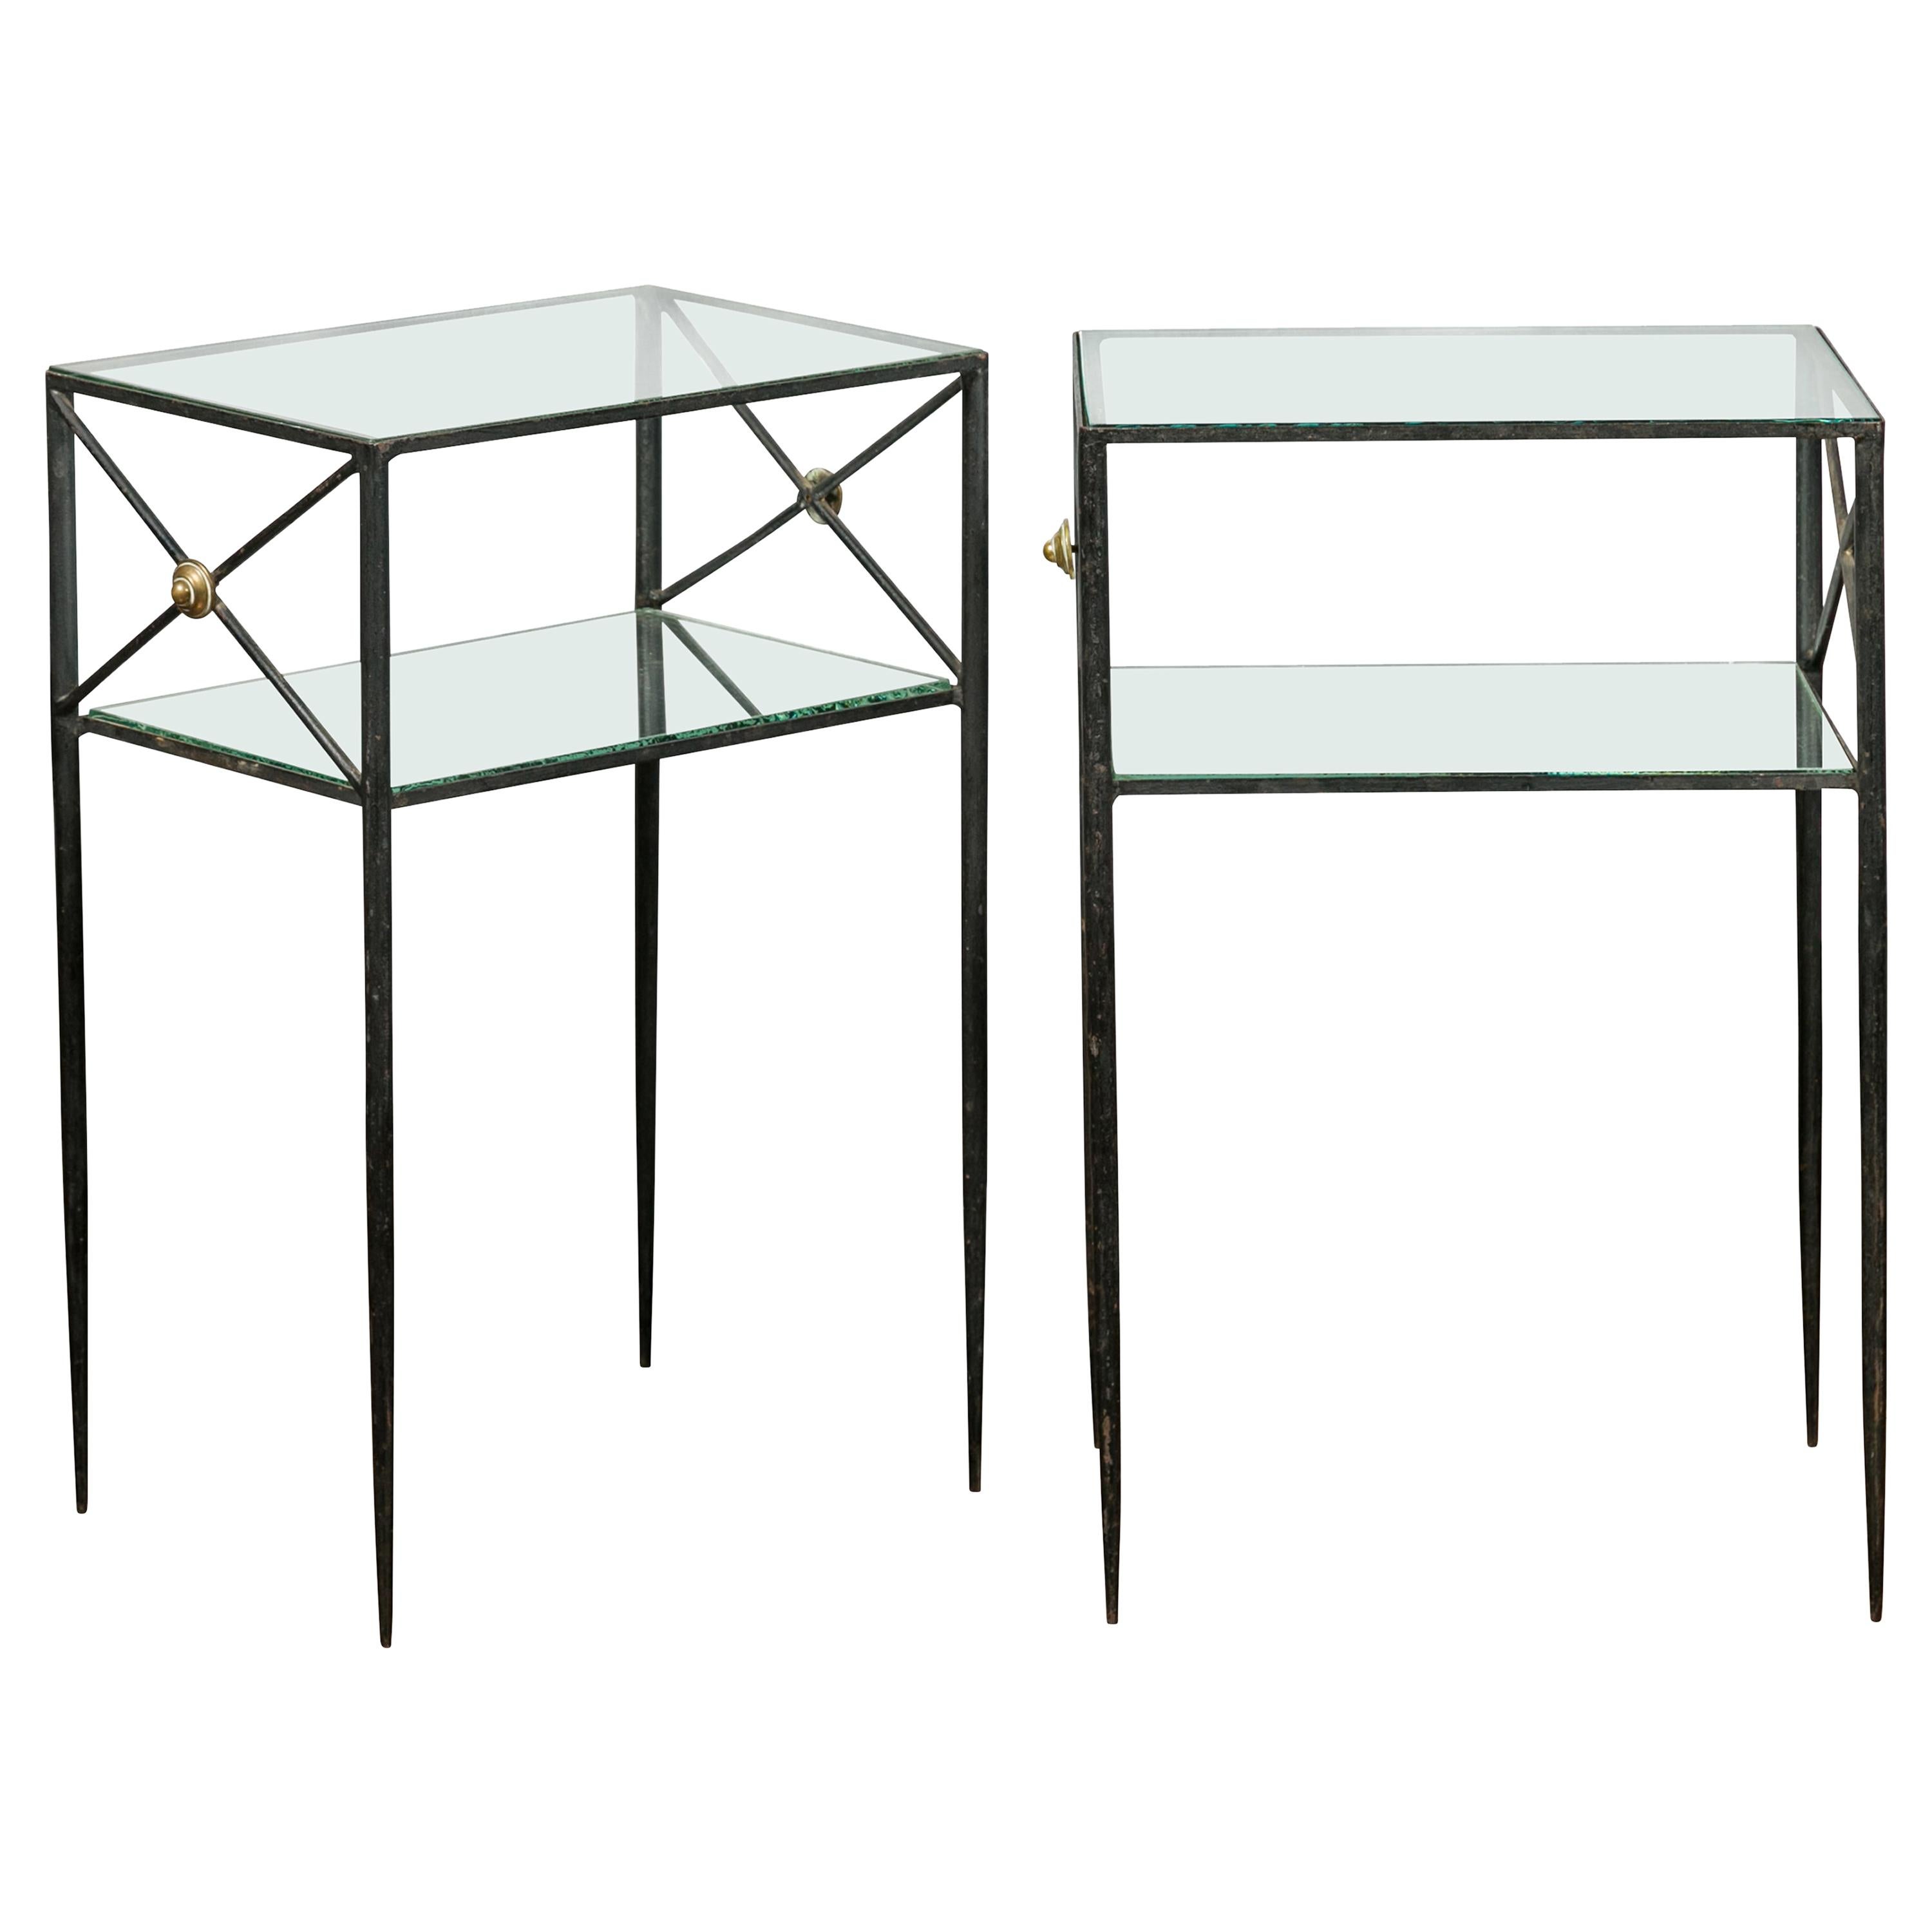 Pair of French Midcentury Iron and Brass Tables with Glass Top, Mirrored Shelf